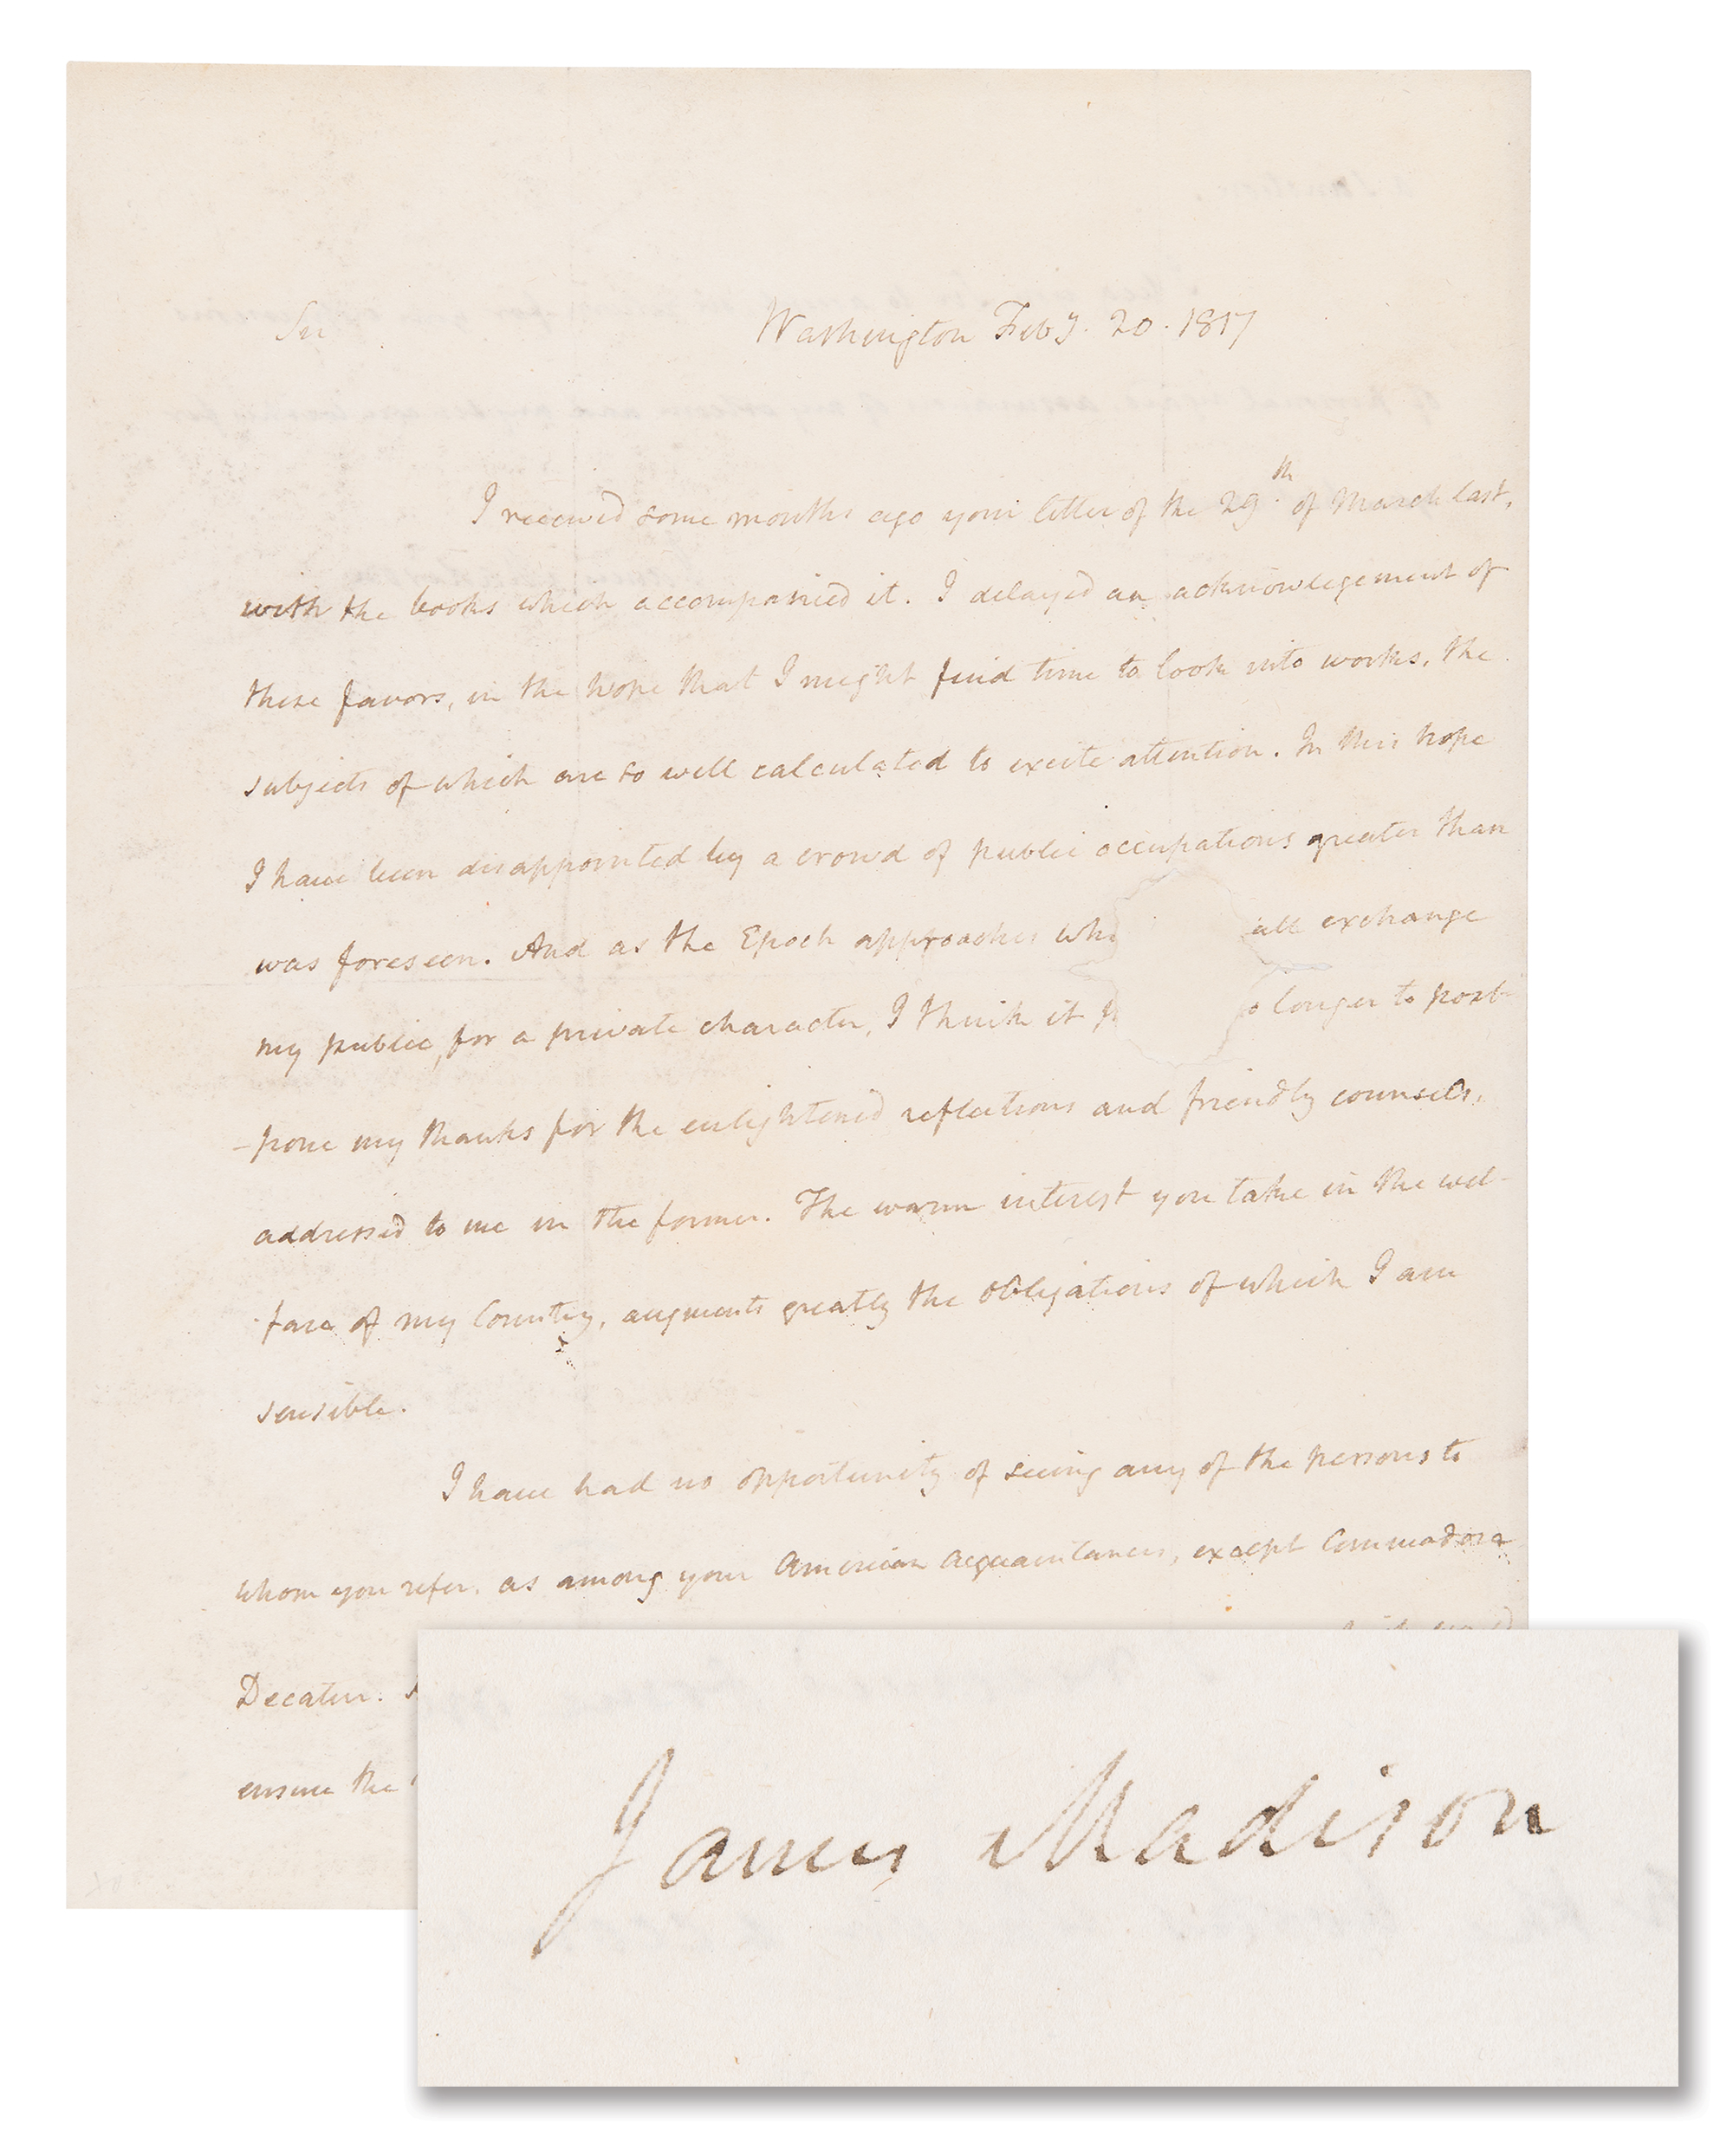 Lot #7 James Madison Autograph Letter Signed as President, Reflecting on the End of His Term and Mentioning Commodore Stephen Decatur - Image 1